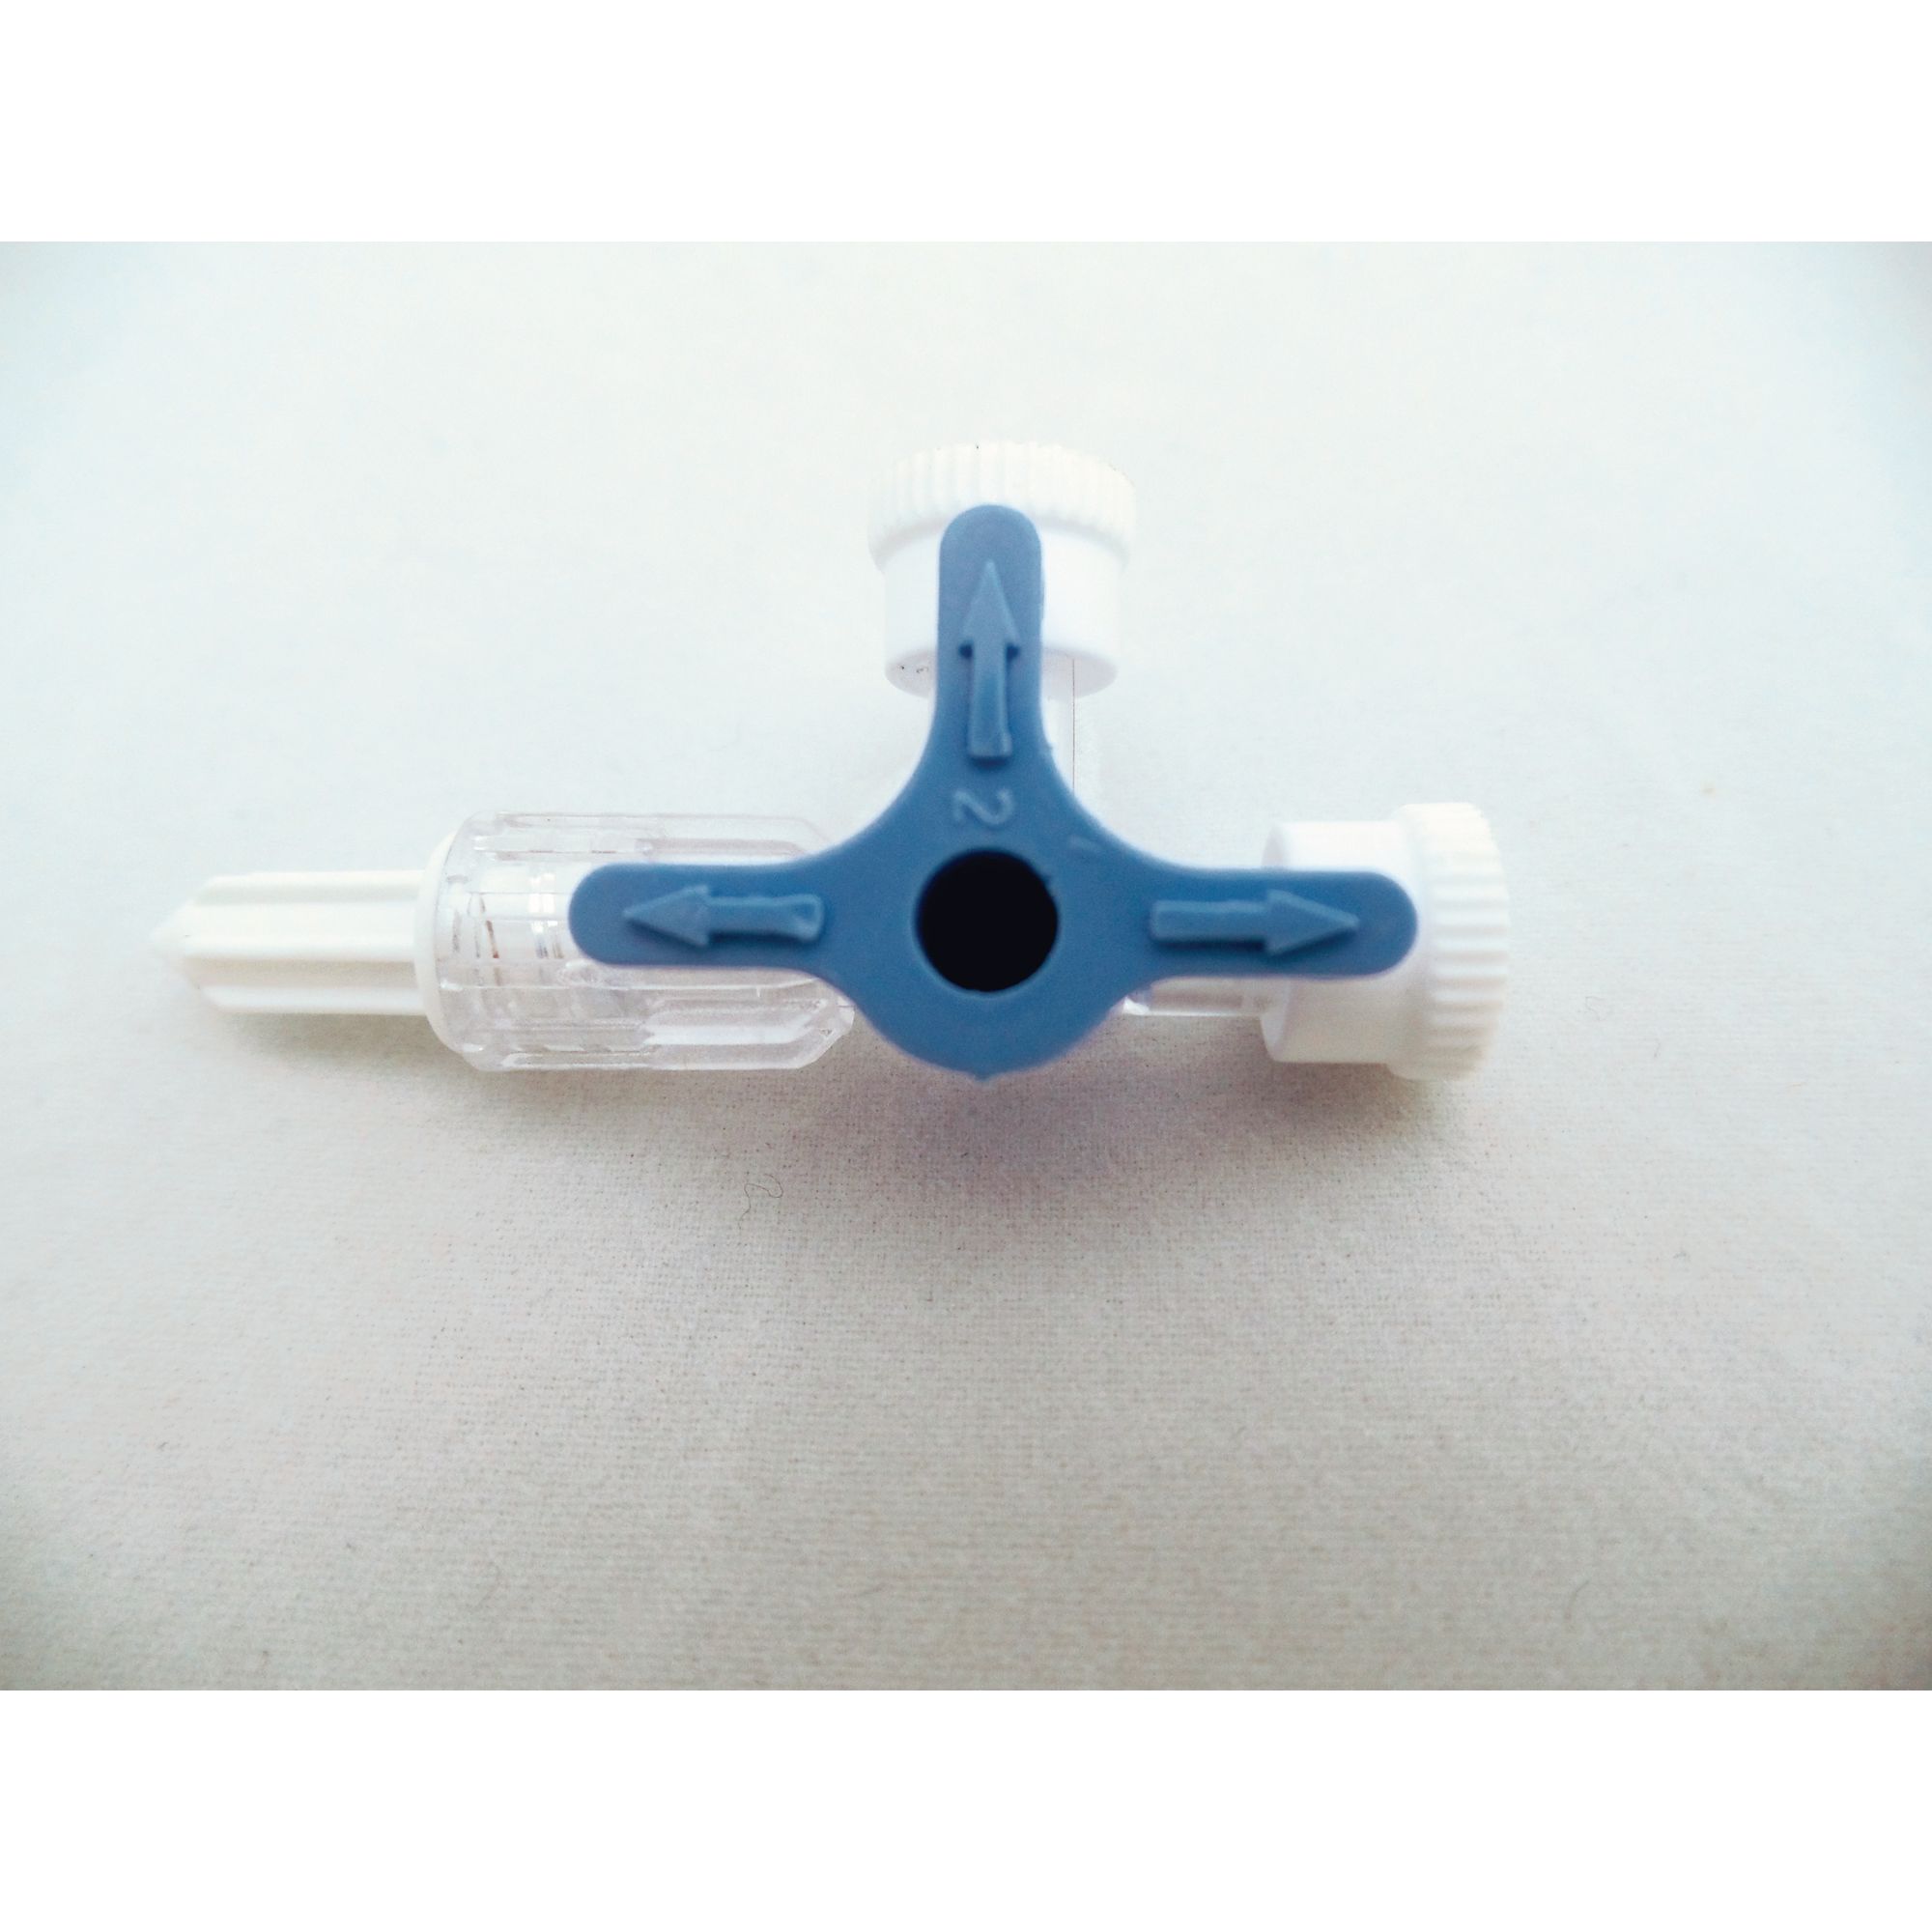 Three-way Tap For Hypodermic Syringe.